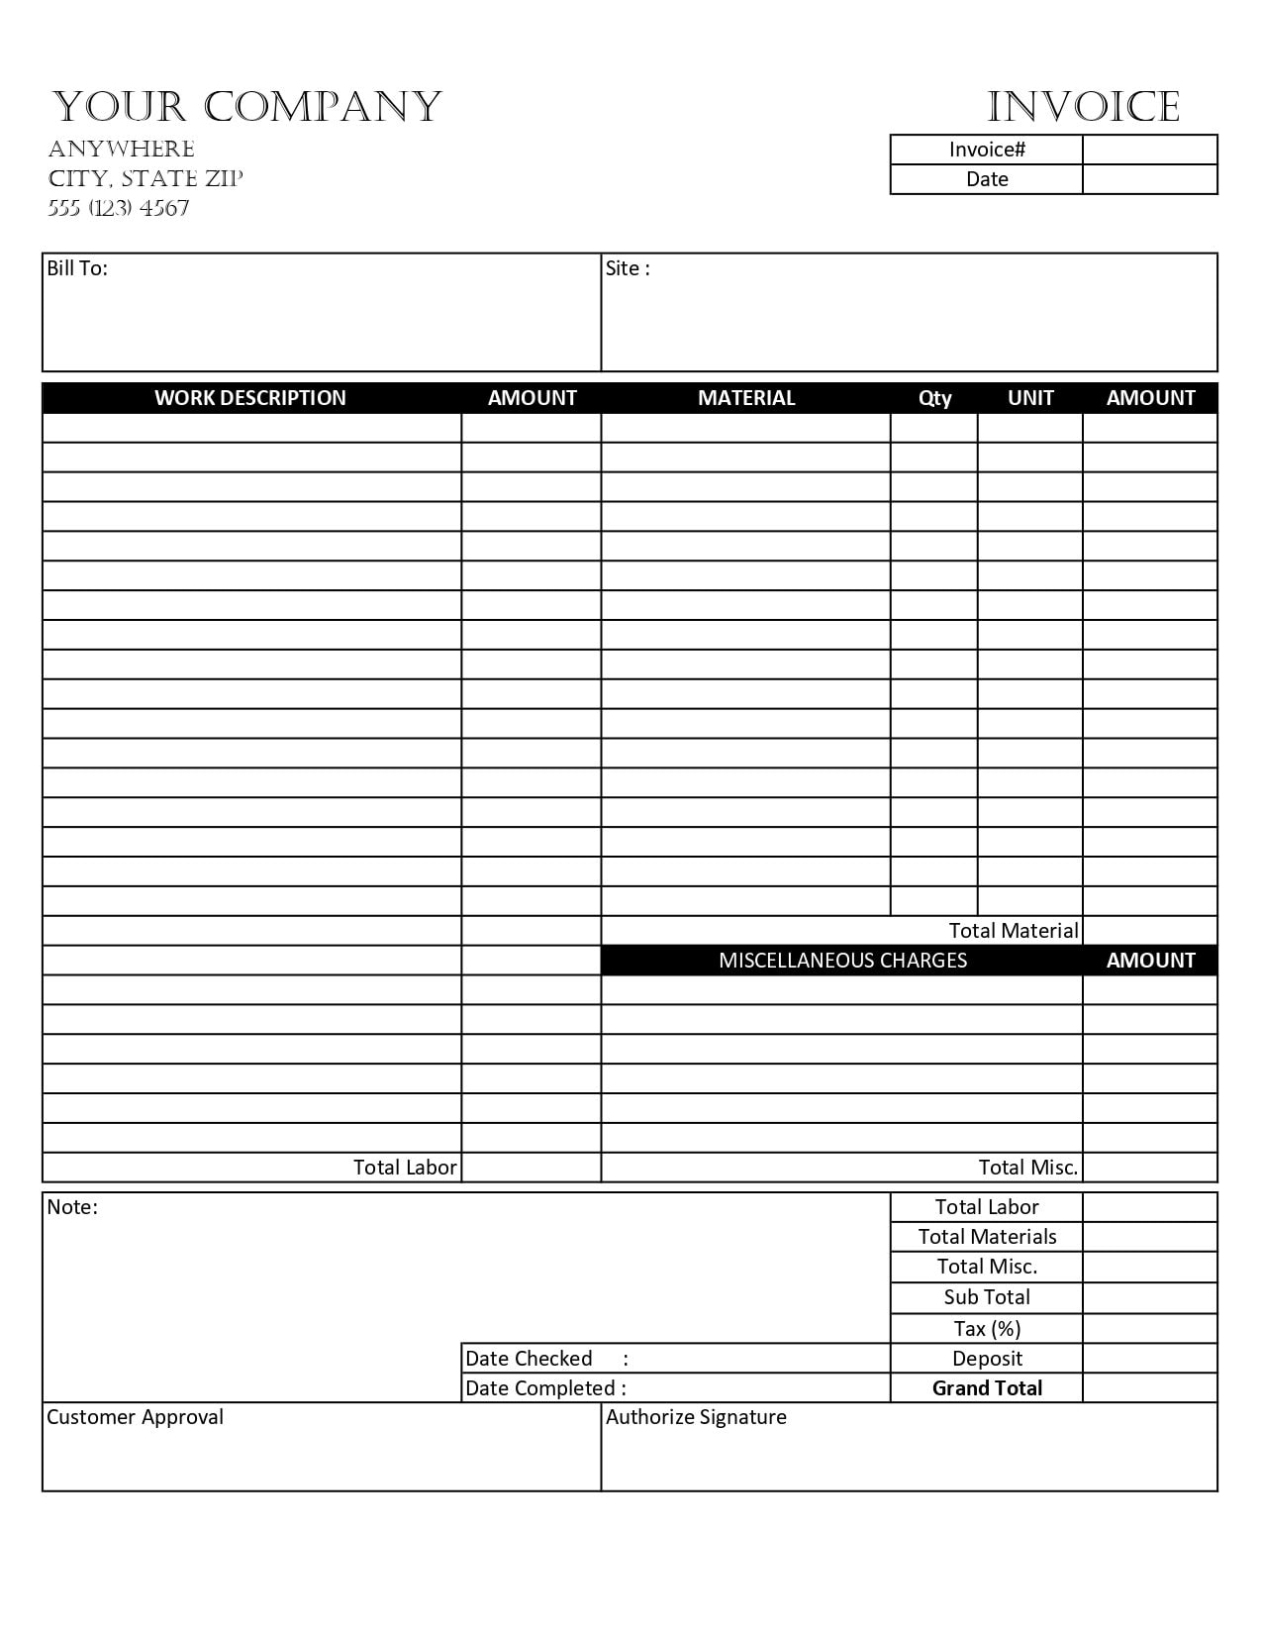 Invoice For Contractor Template / Printable Invoice / Business | Etsy Within Contractor Invoices Templates